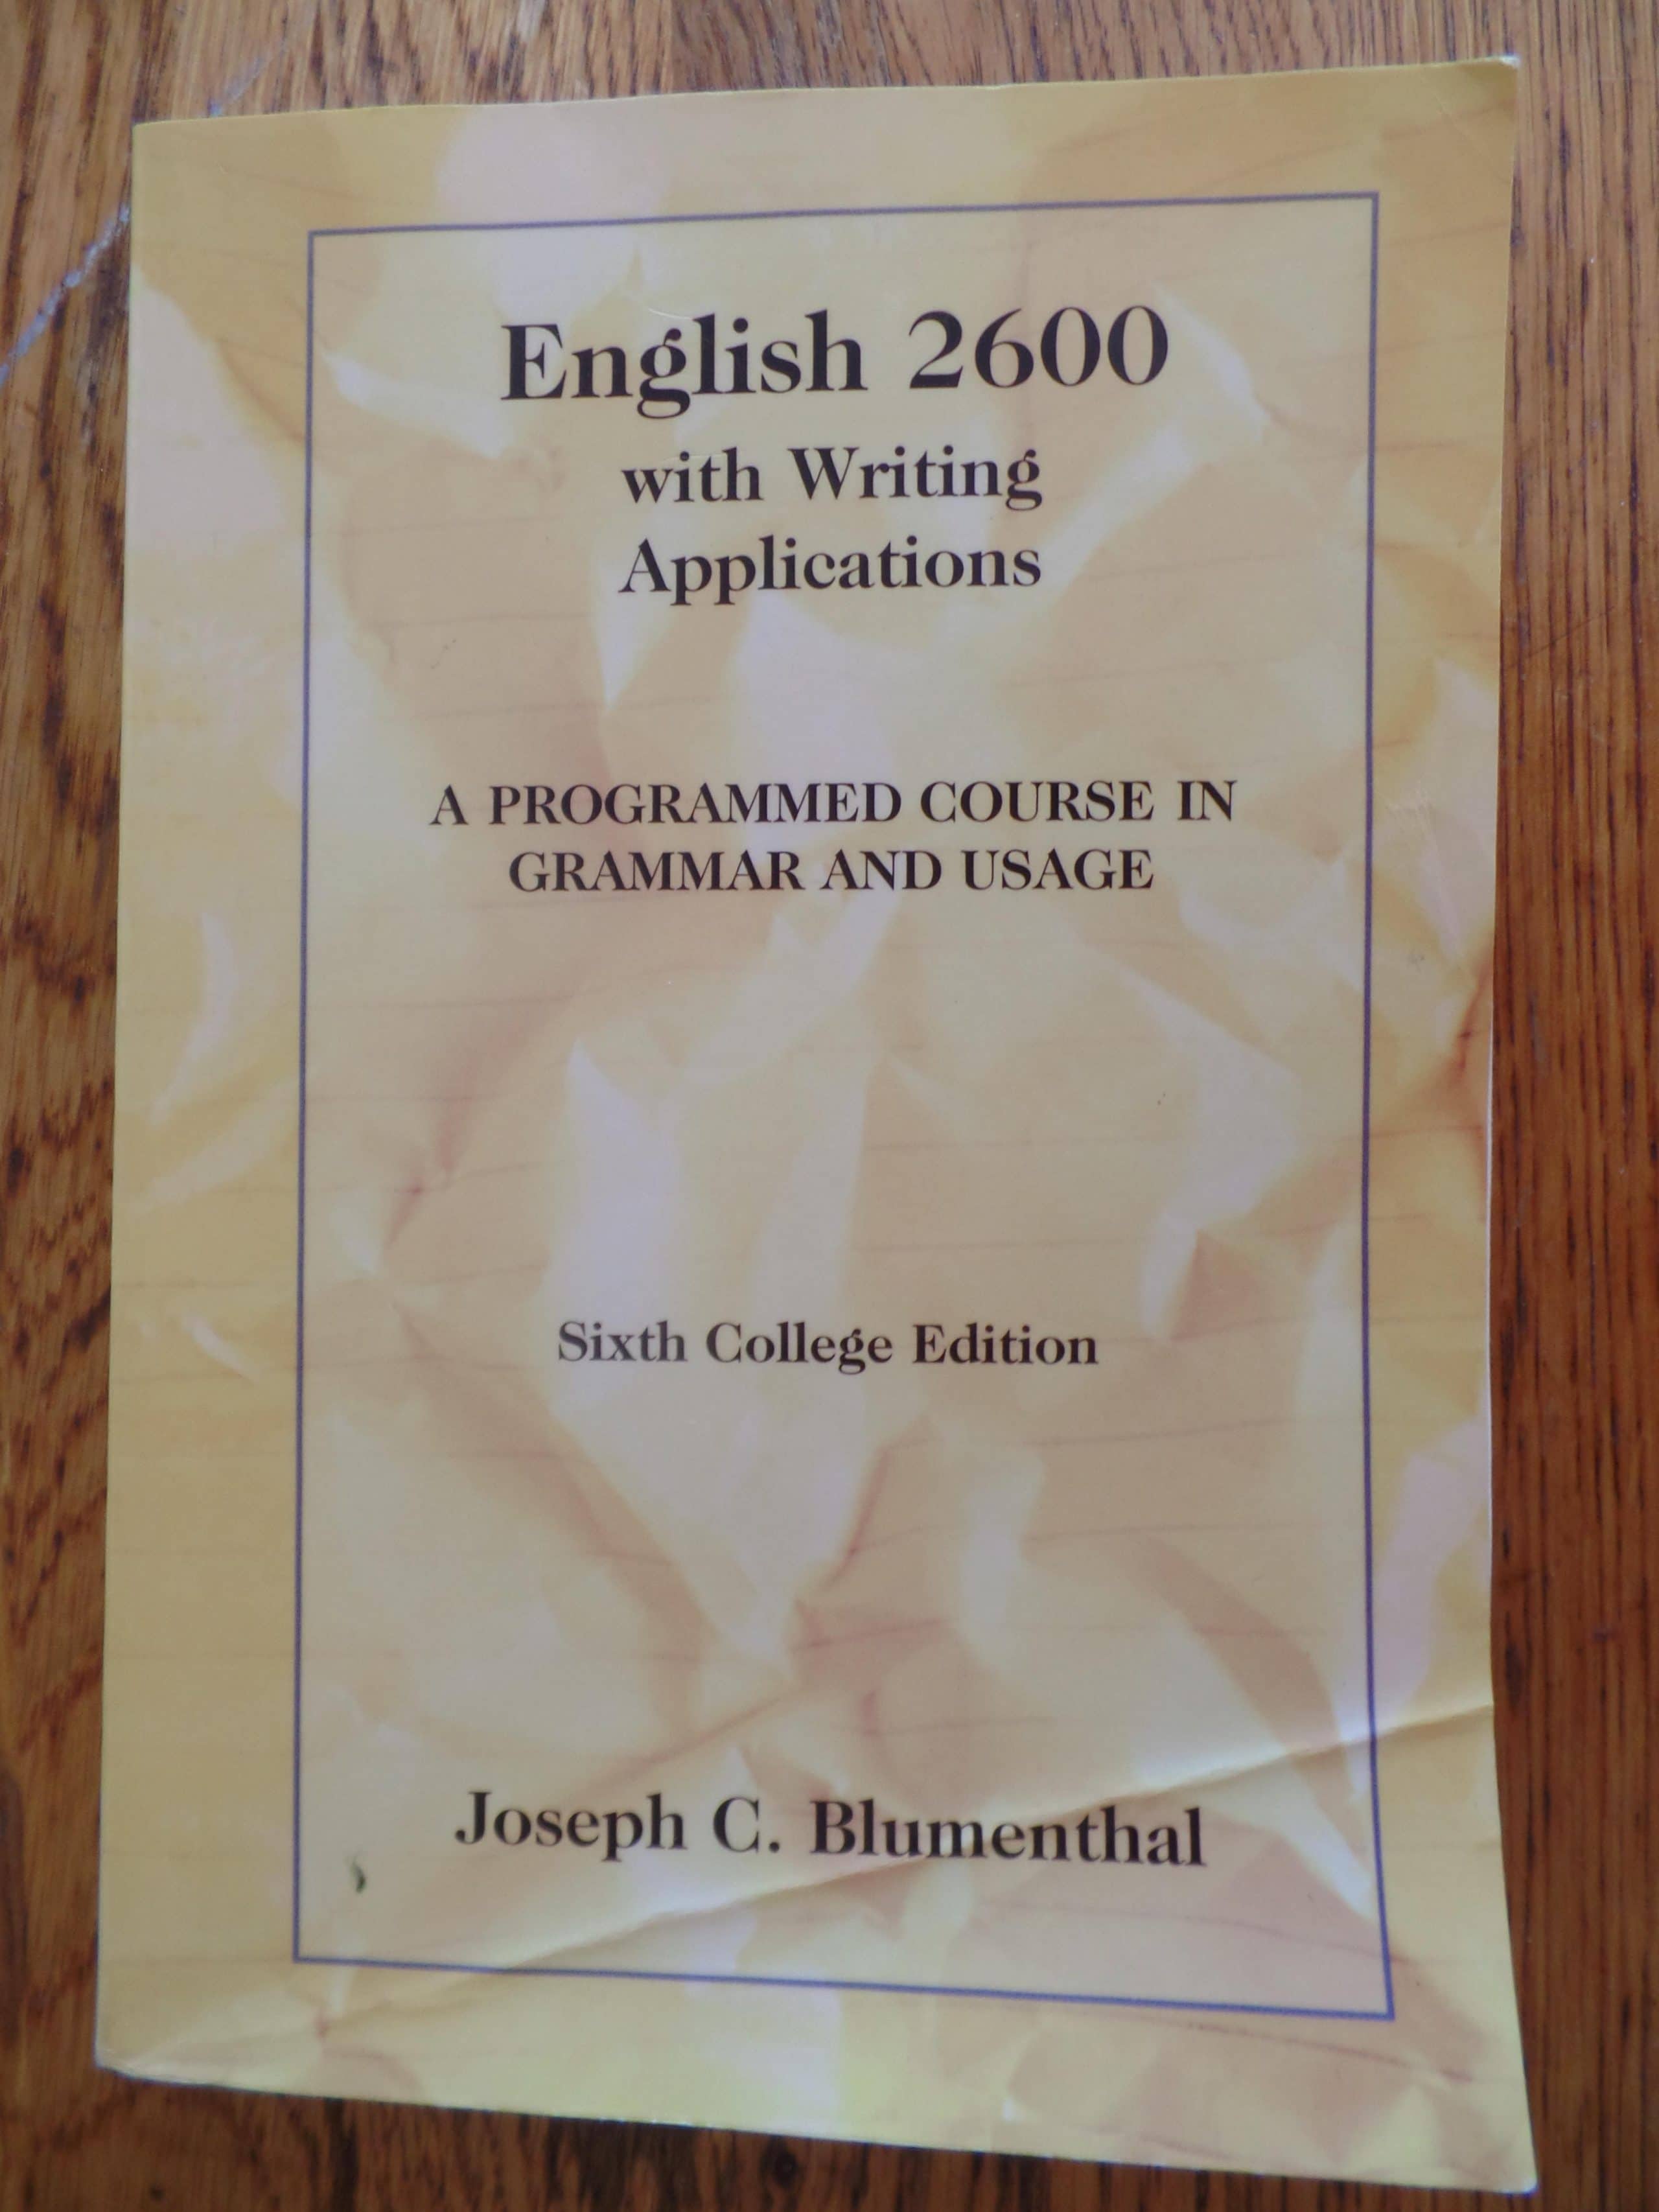 English 2600 High School Grammar Course – My Review